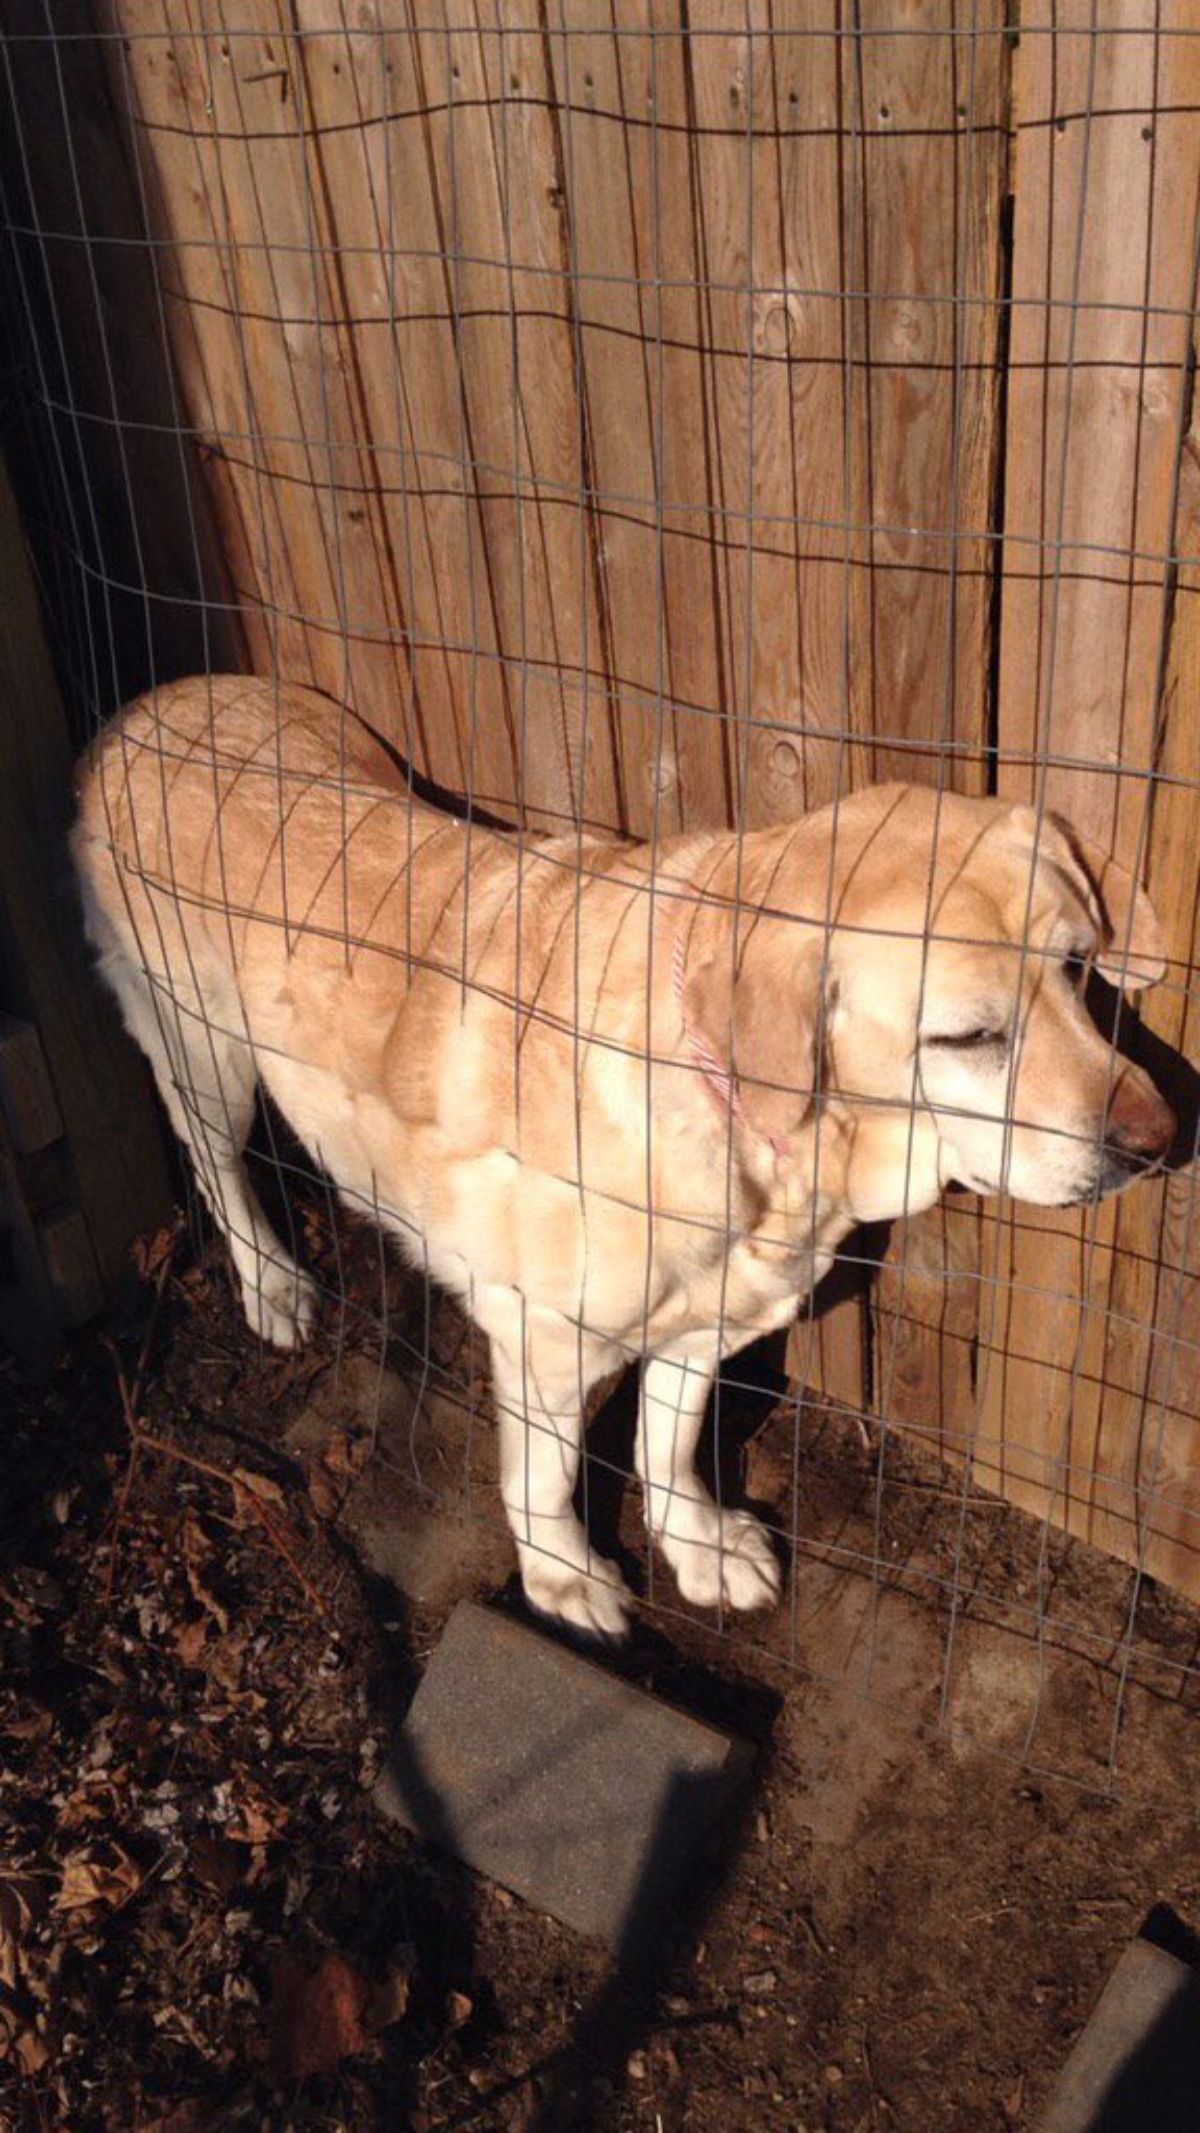 yellow labrador retriever stuck between a metal fence and a wooden wall